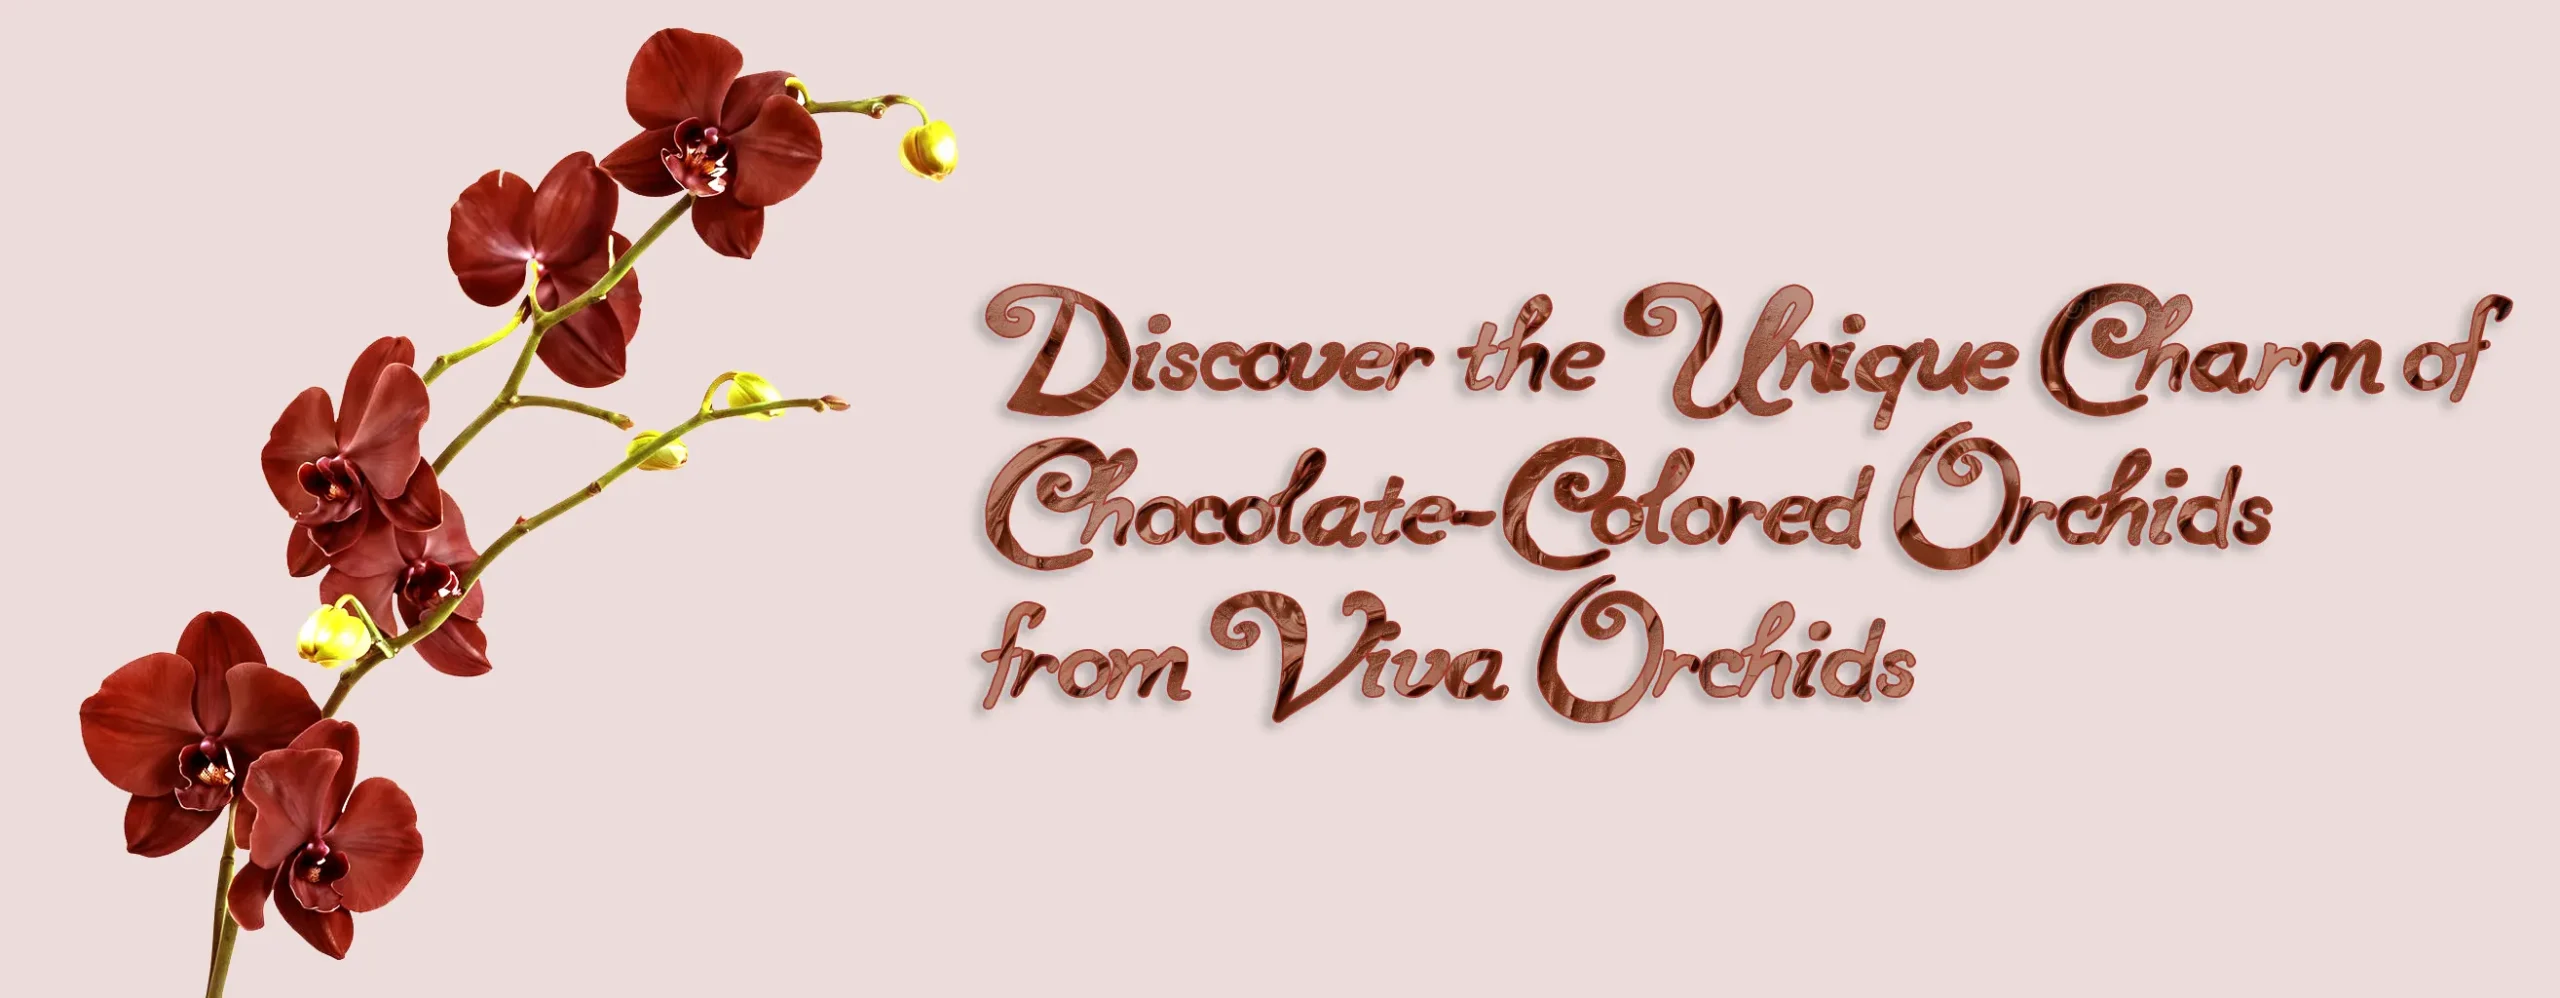 Discover the Unique Charm of Chocolate-Colored Orchids from Viva Orchids